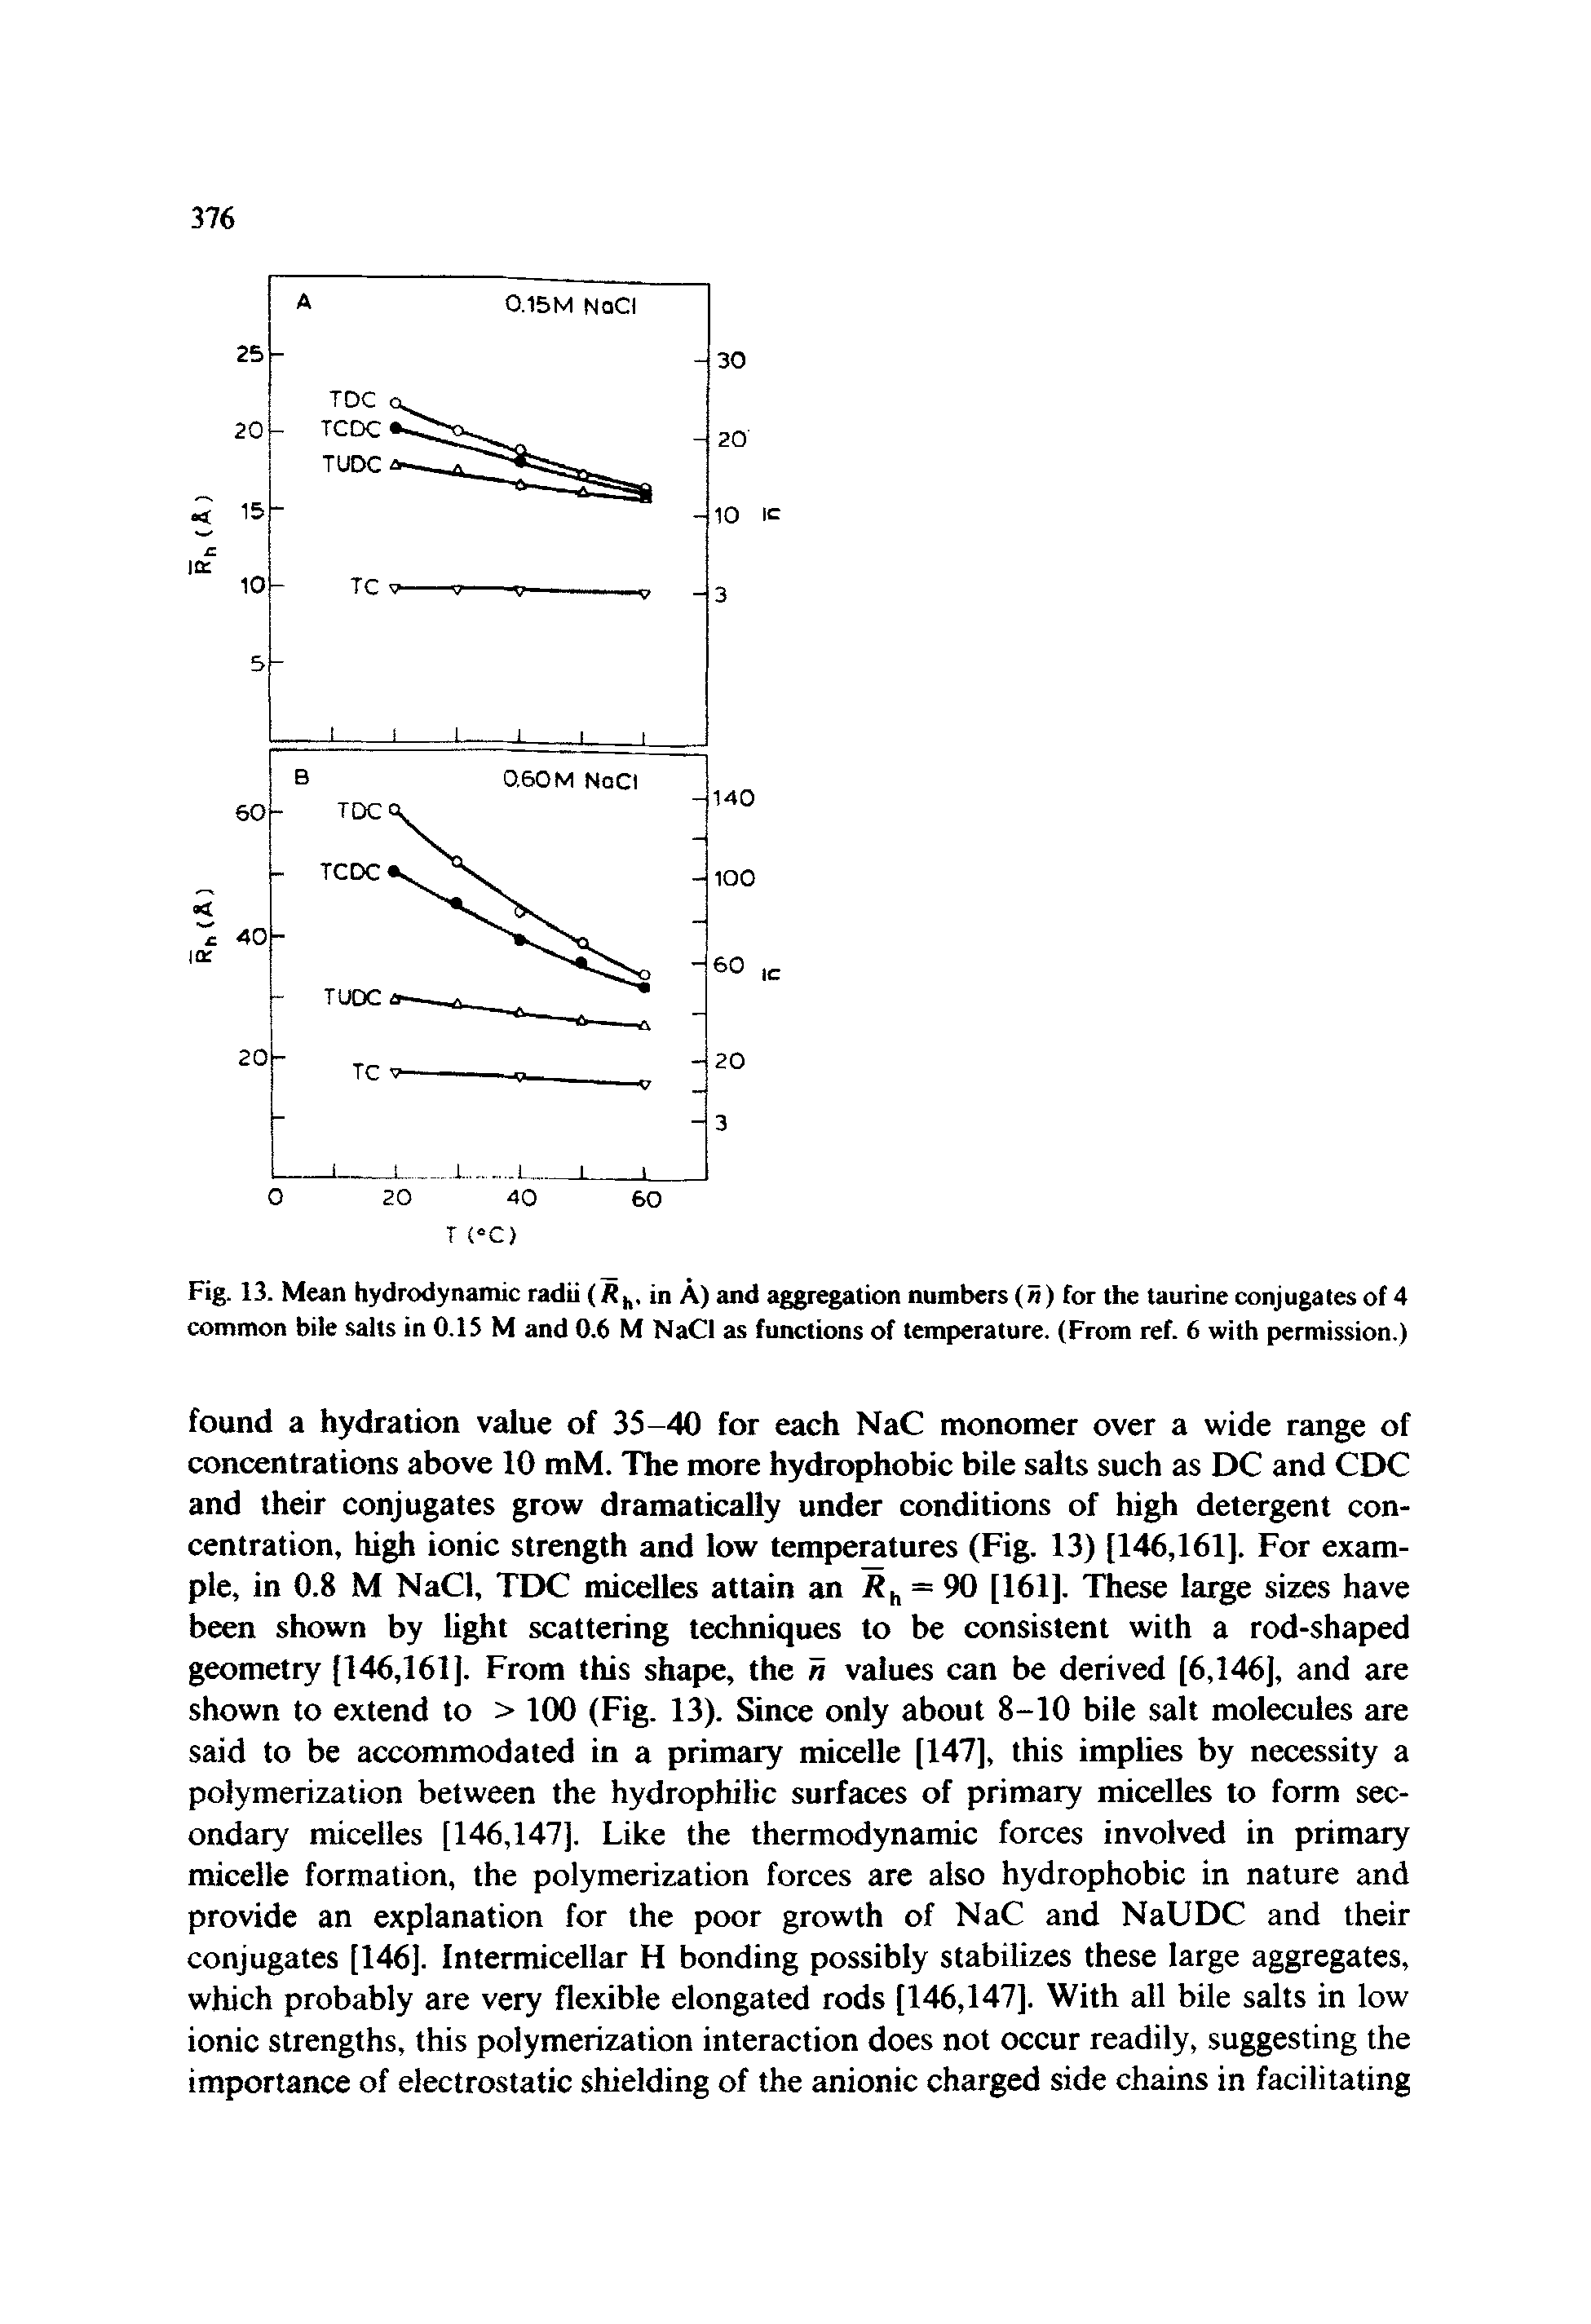 Fig. 13. Mean hydrodynamic radii (/ , in A) and aggregation numbers (/i) for the taurine conjugates of 4 common bile salts in 0.15 M and 0.6 M NaCl as functions of temperature. (From ref. 6 with permission.)...